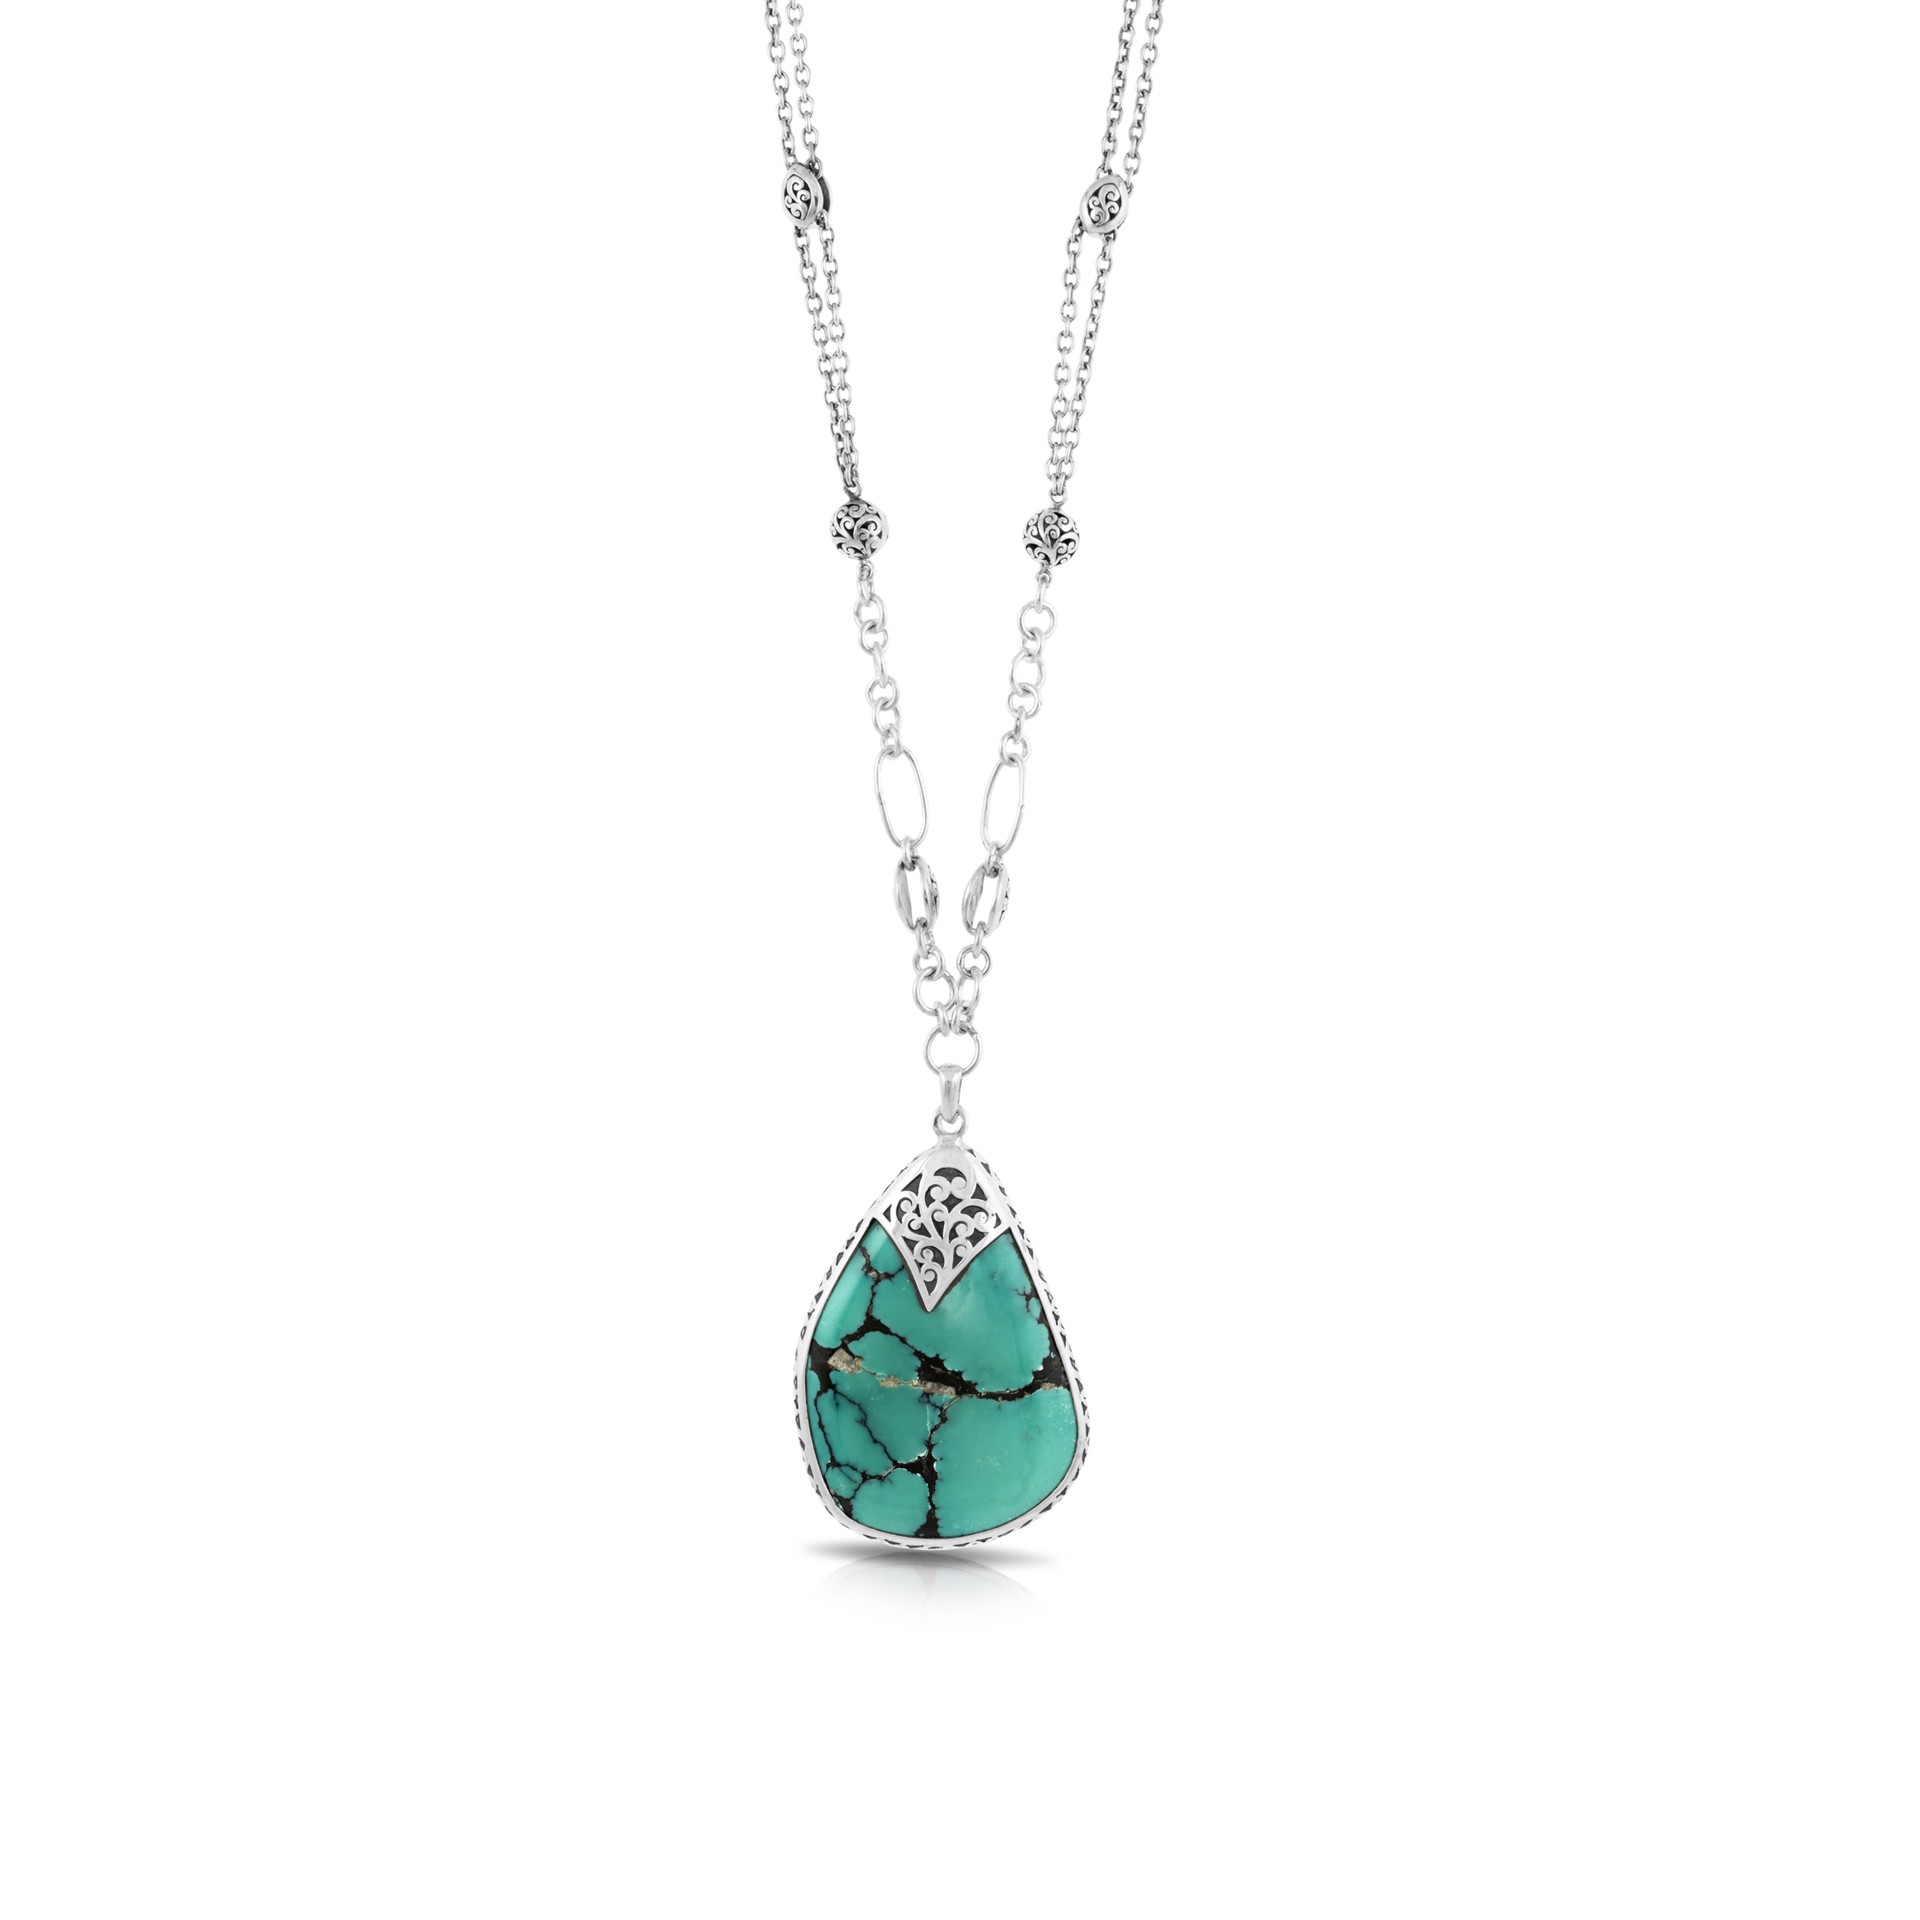 9690 Organic Shaped Turquoise with Hand Carved LH Scroll Rim on Handmade Sterling 17" Silver Chain, Pendant 39 by 55mm by Lois Hill